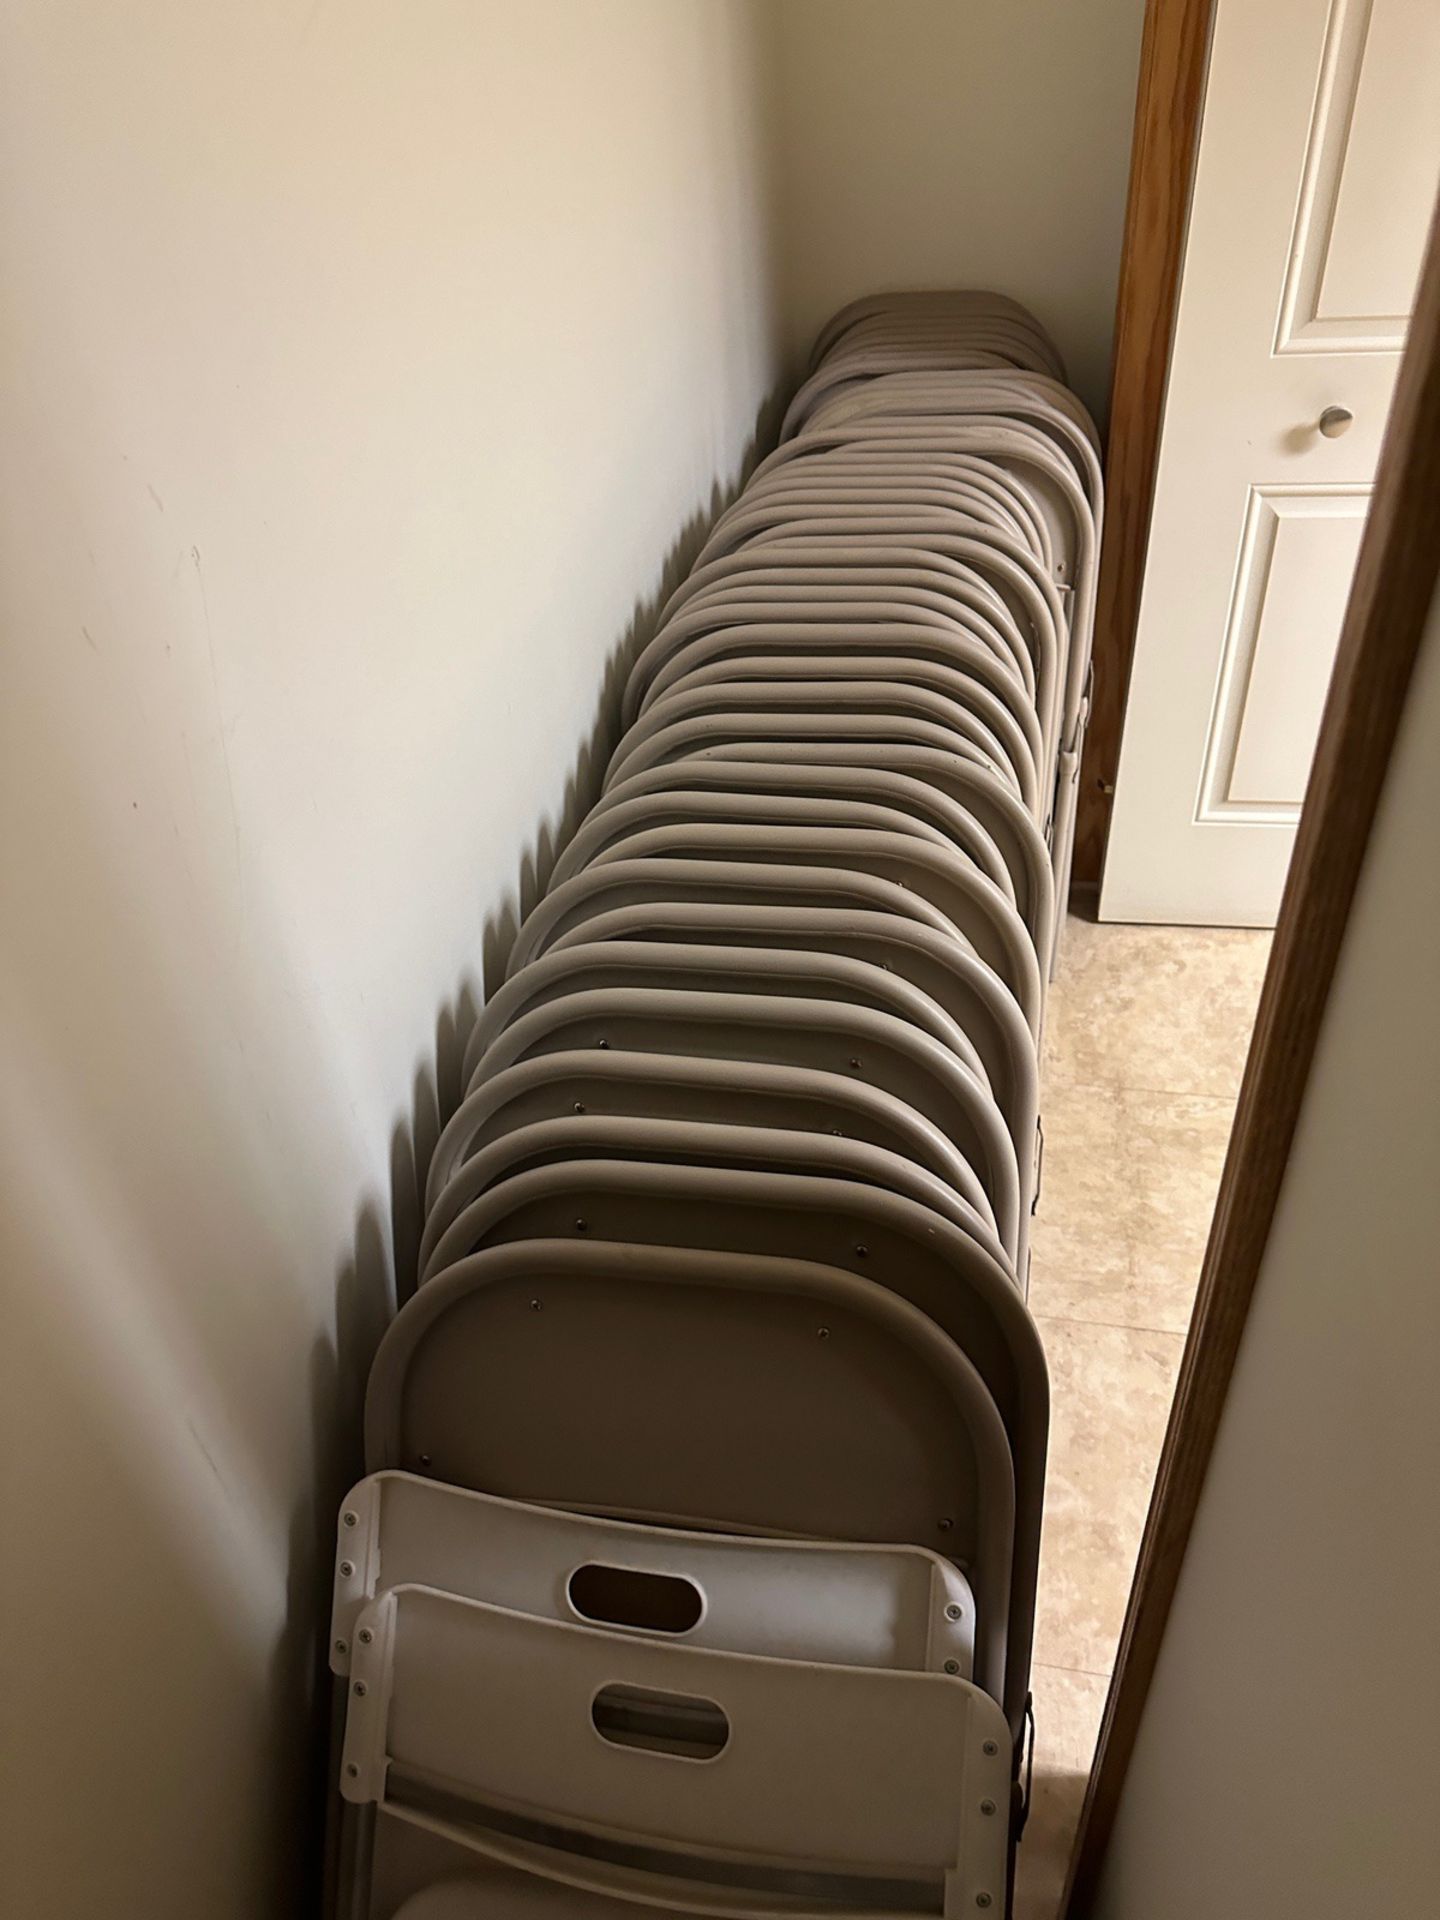 Lot of Contents of Break Room Including (44) Folding Chairs | Rig Fee $450 - Image 7 of 7